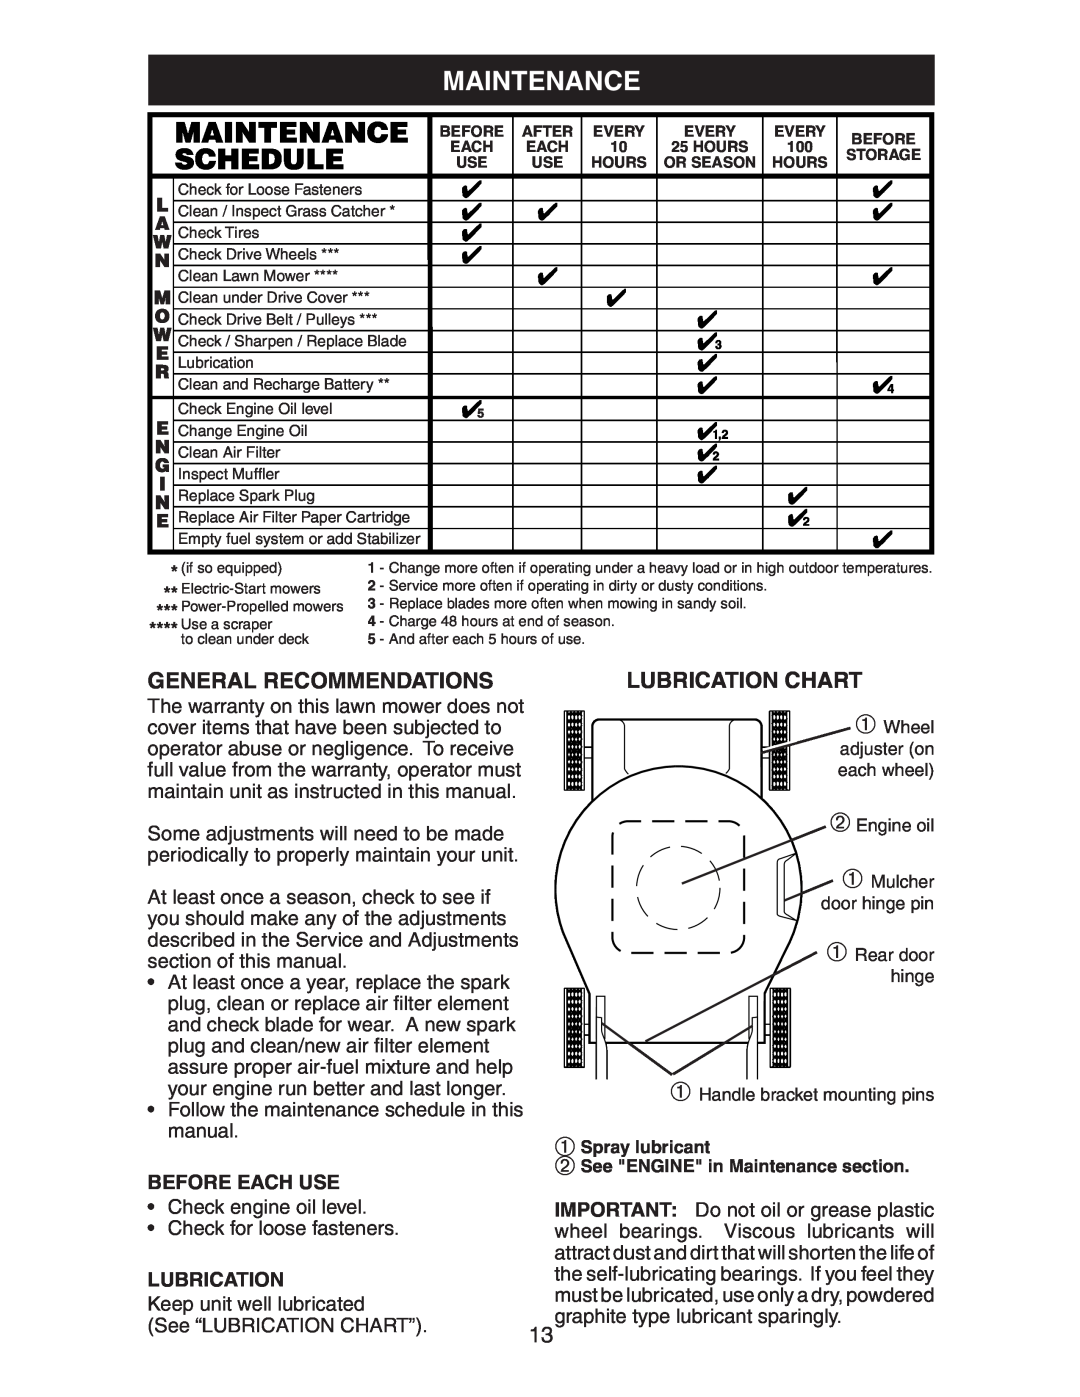 Kenmore 917.37707 owner manual Maintenance, General Recommendations, Lubrication Chart, Before Each Use 